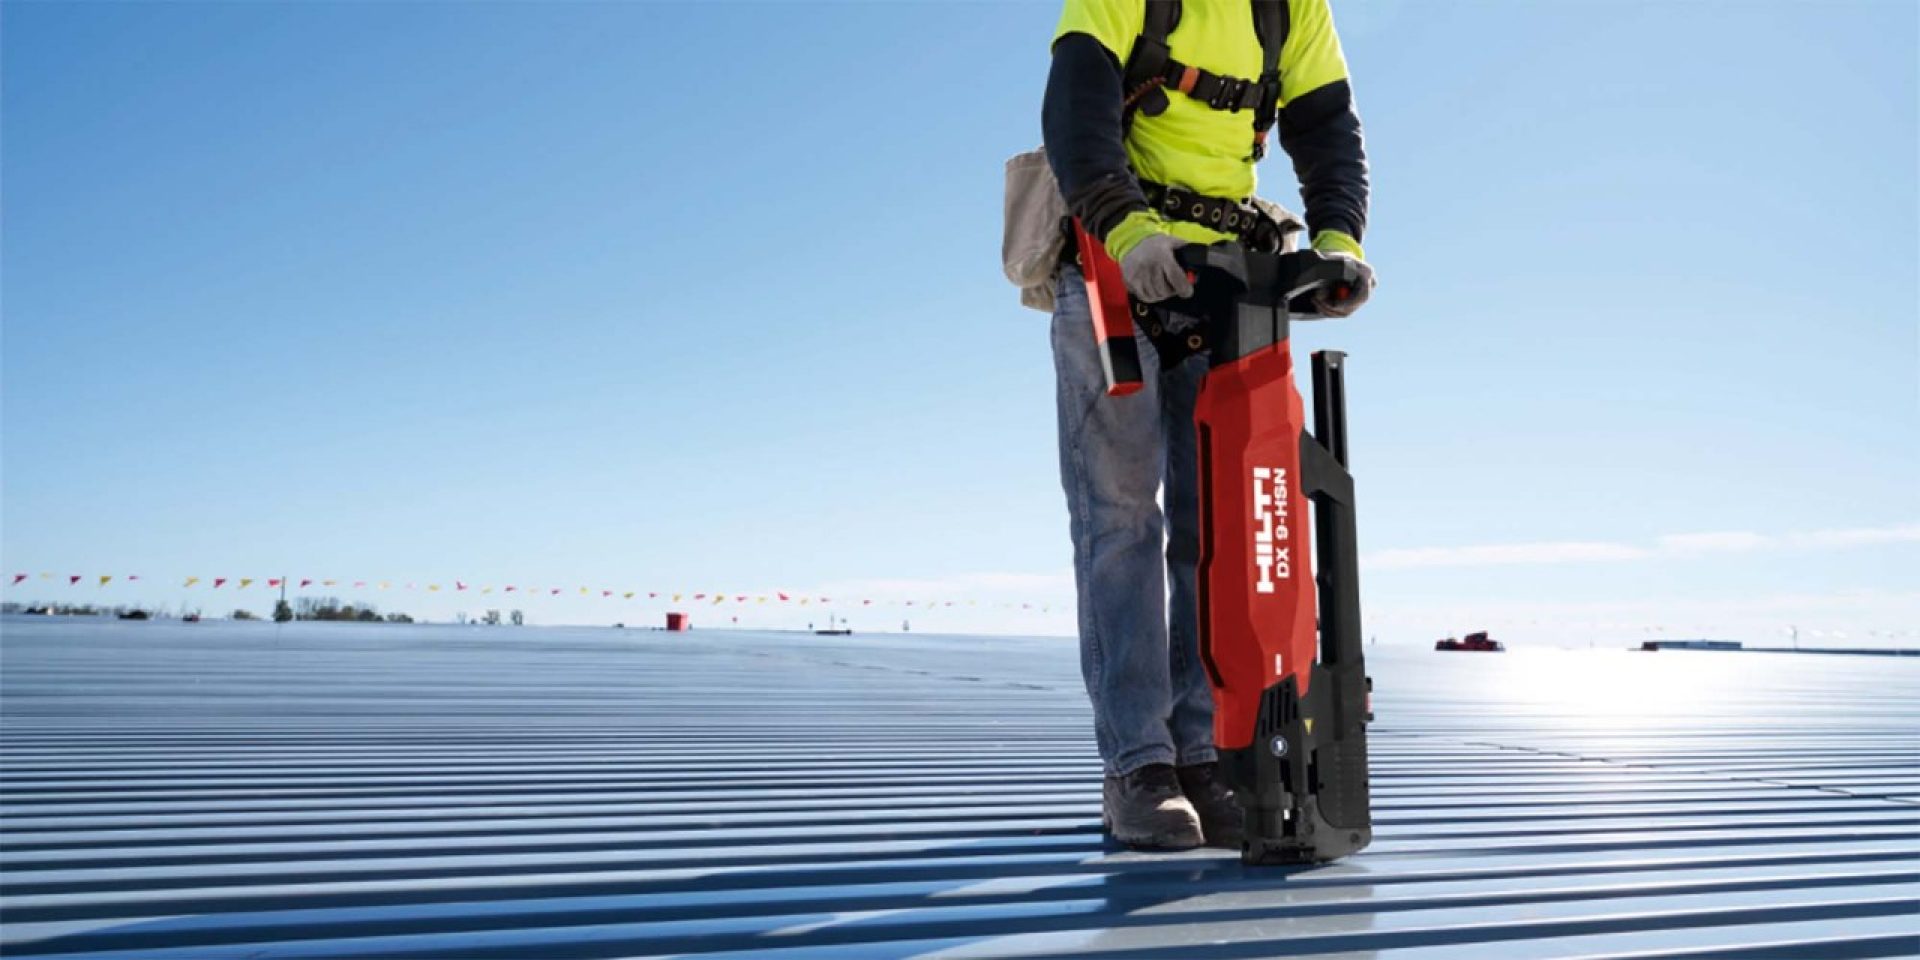 The DX 9 stand-up decking tool that can be used with the Hilti Connect app